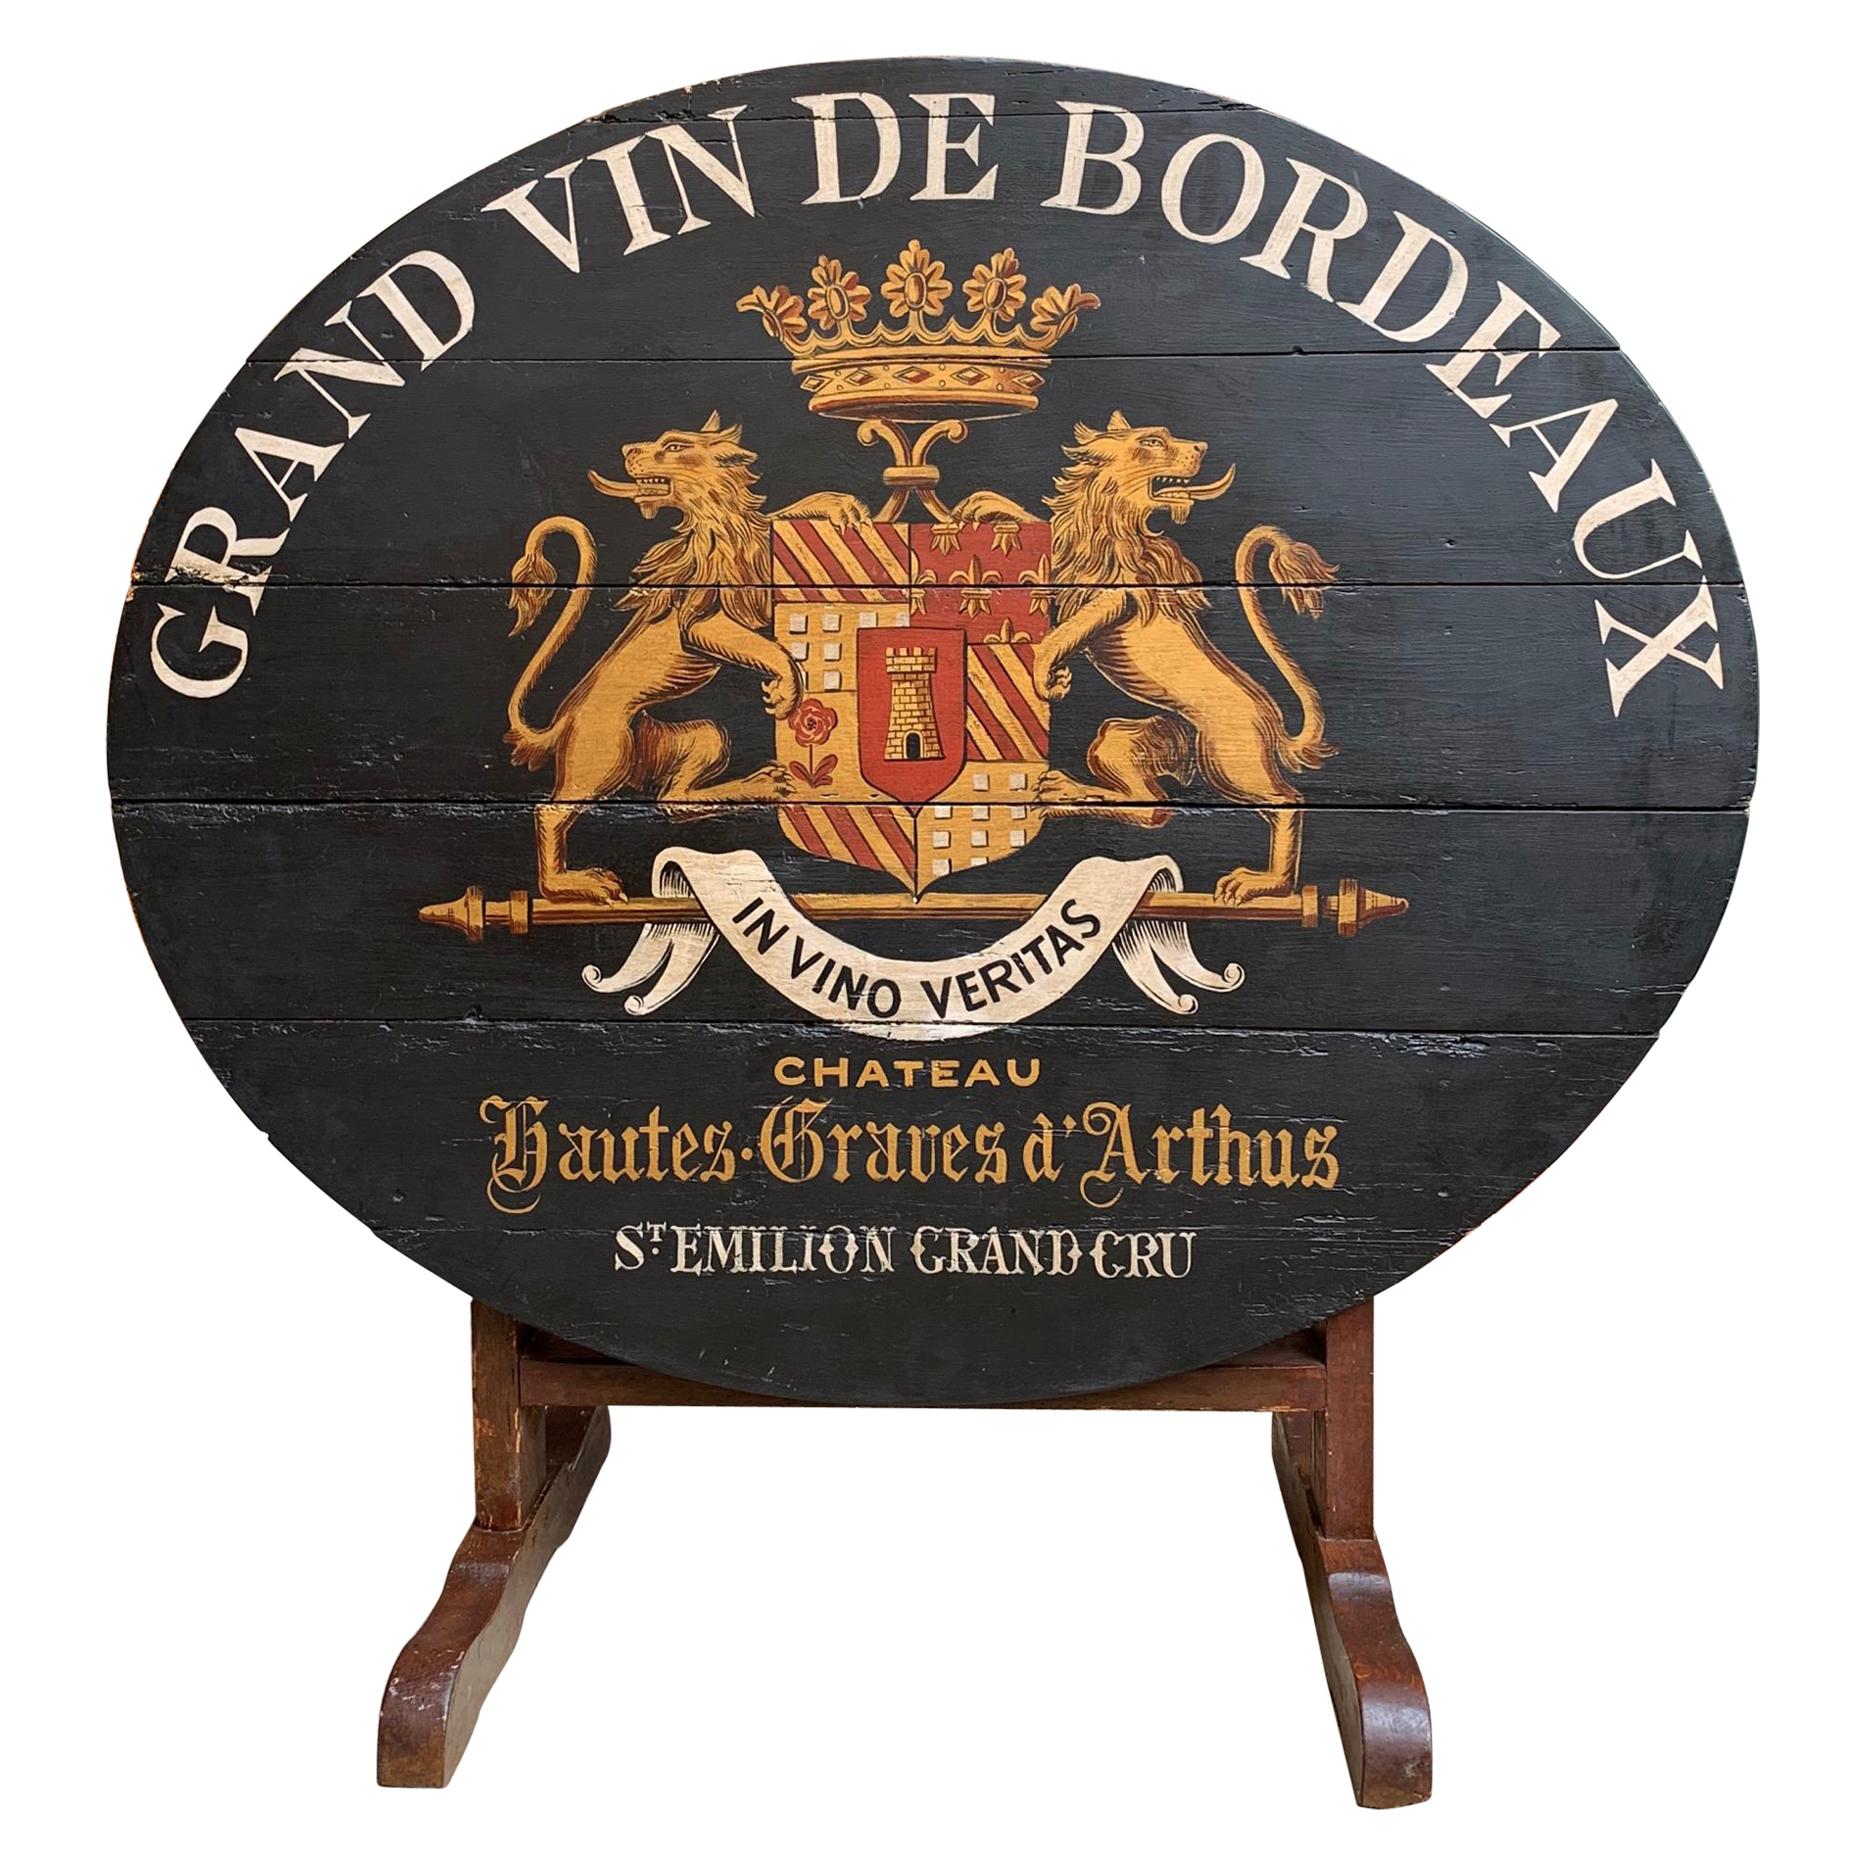 19th Century French Tilt-Top Table Wine Tasting Oval Painted Black Grand Cru